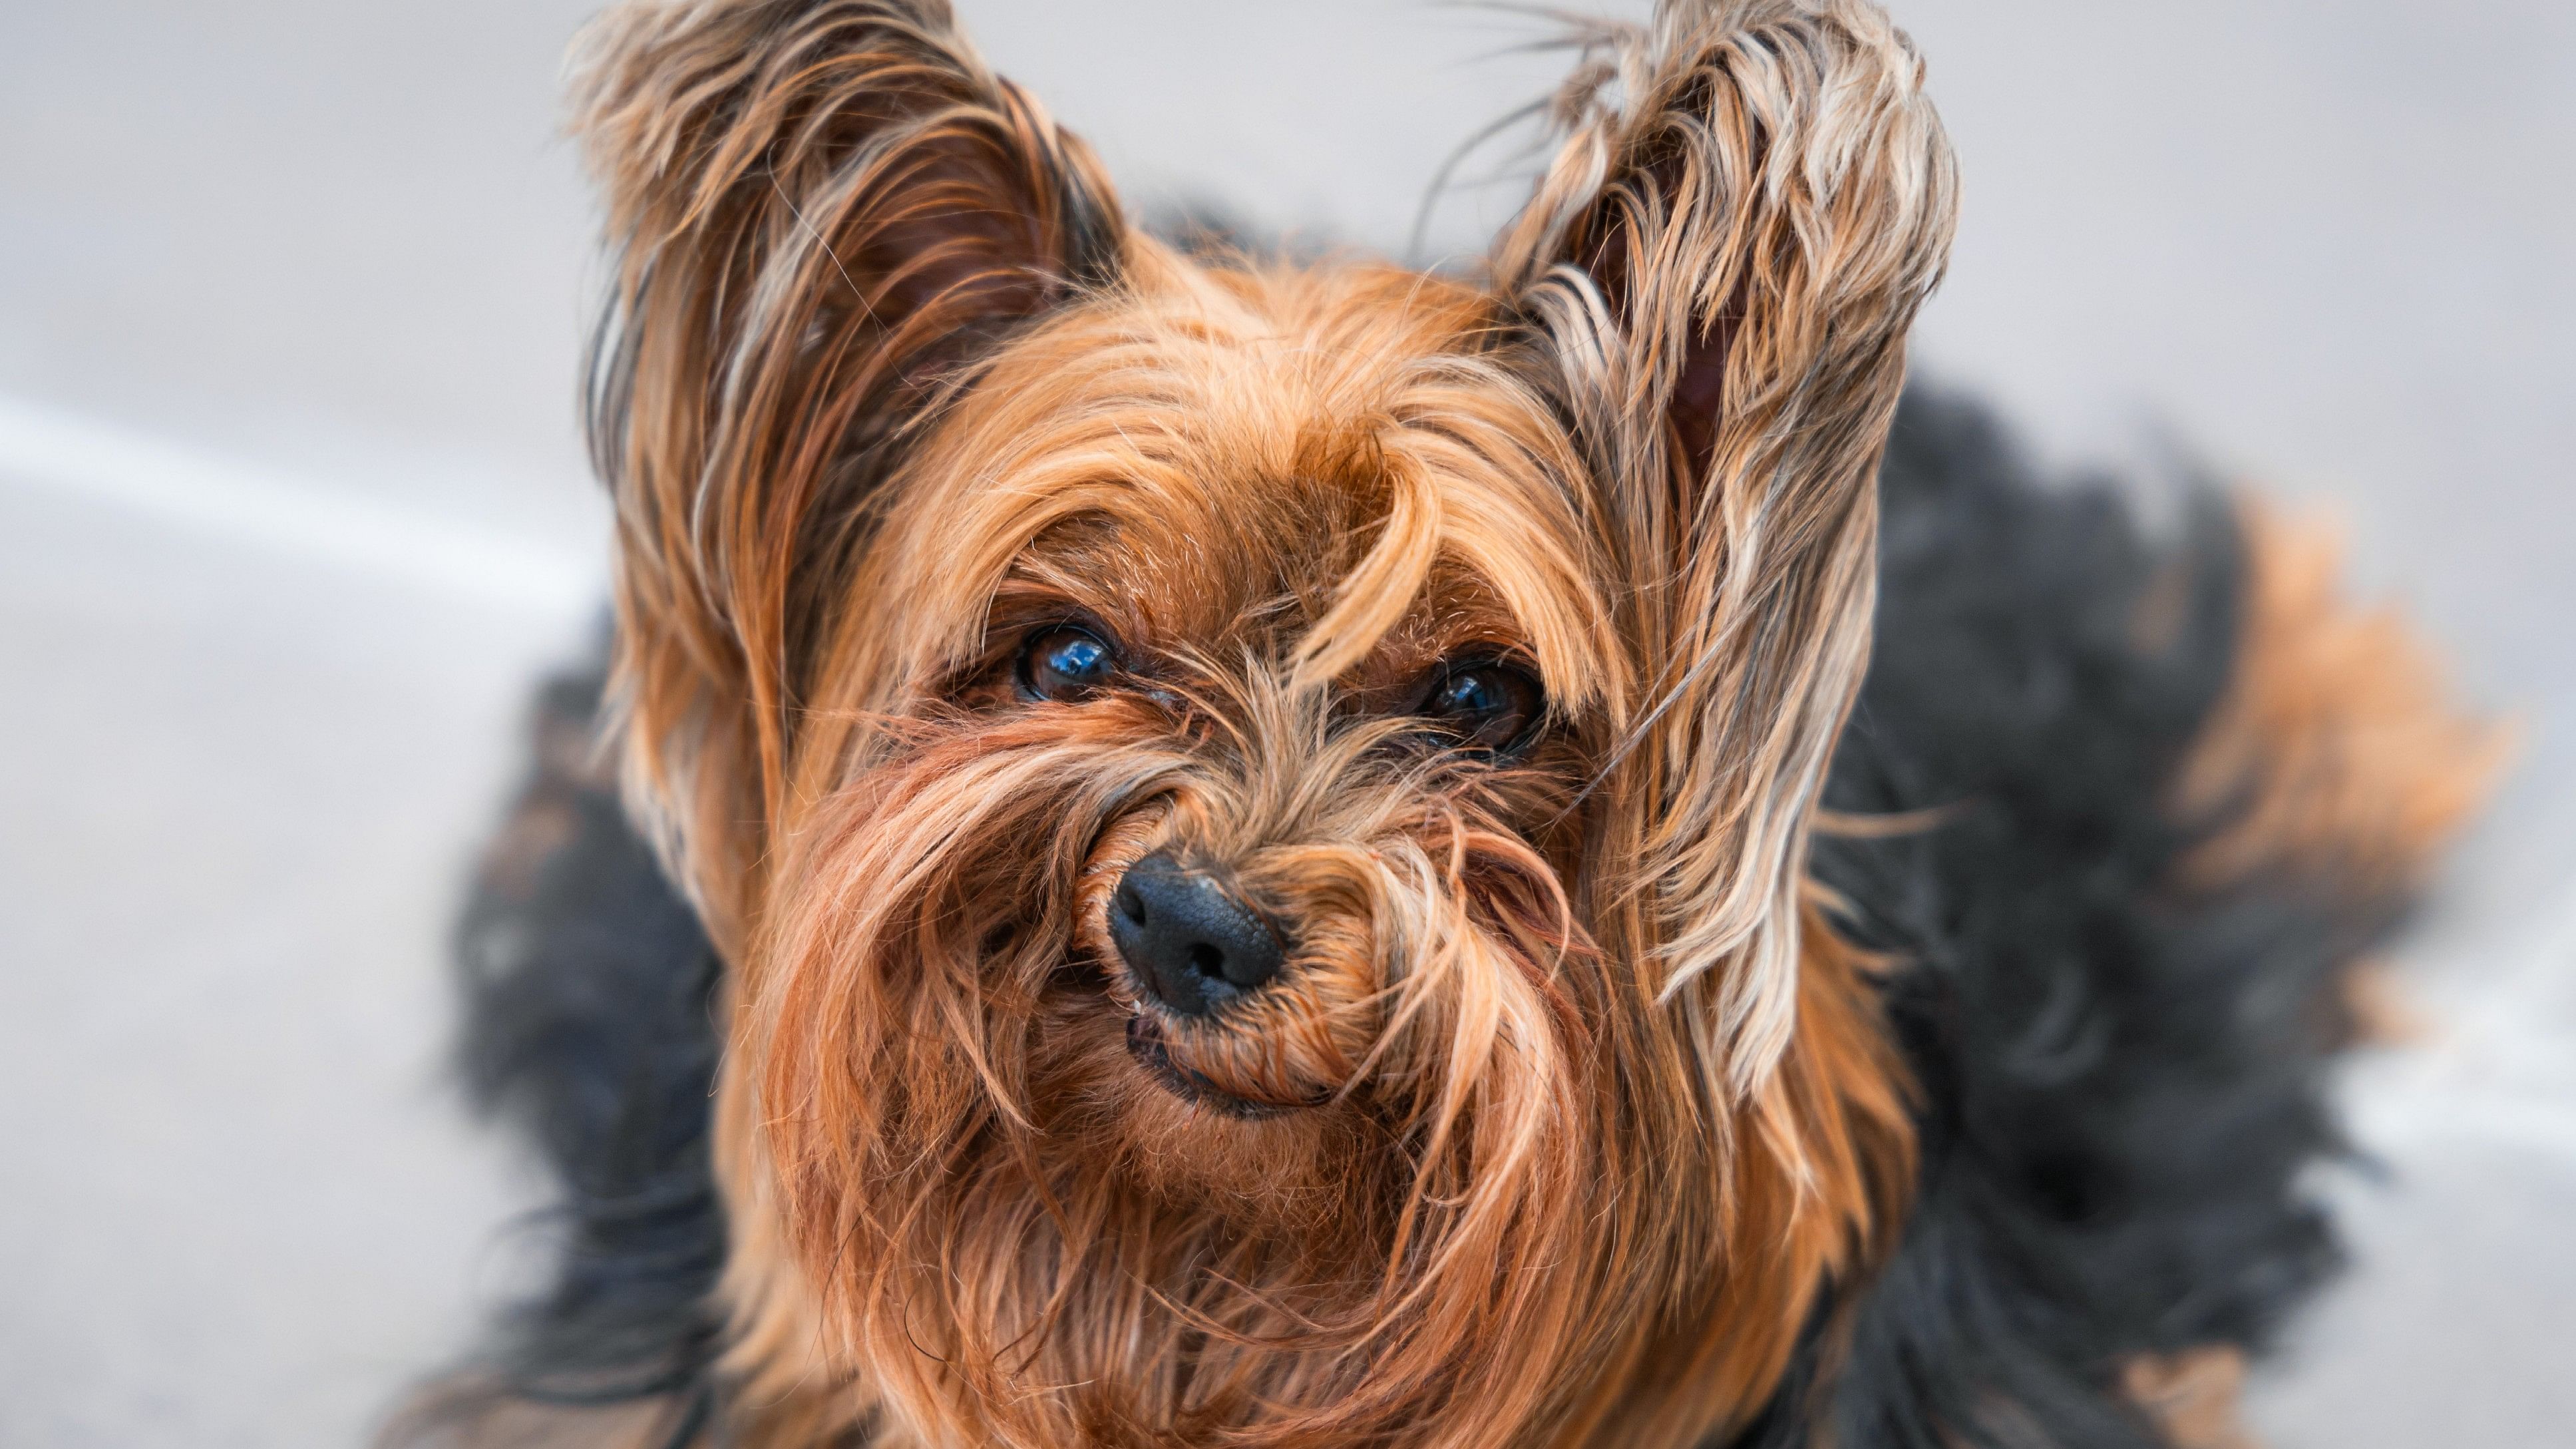 Photographer Luiza Ribeiro titled this photo "Grumpy dog". "Meet Nick Barry, a 5-year-old Yorkshire Terrier with a special talent for hilarious expressions.  It might not be his most flattering photo, but that frown is undeniably captivating: a true portrait of a dog who doesn't need smiles to win our hearts." she captioned.